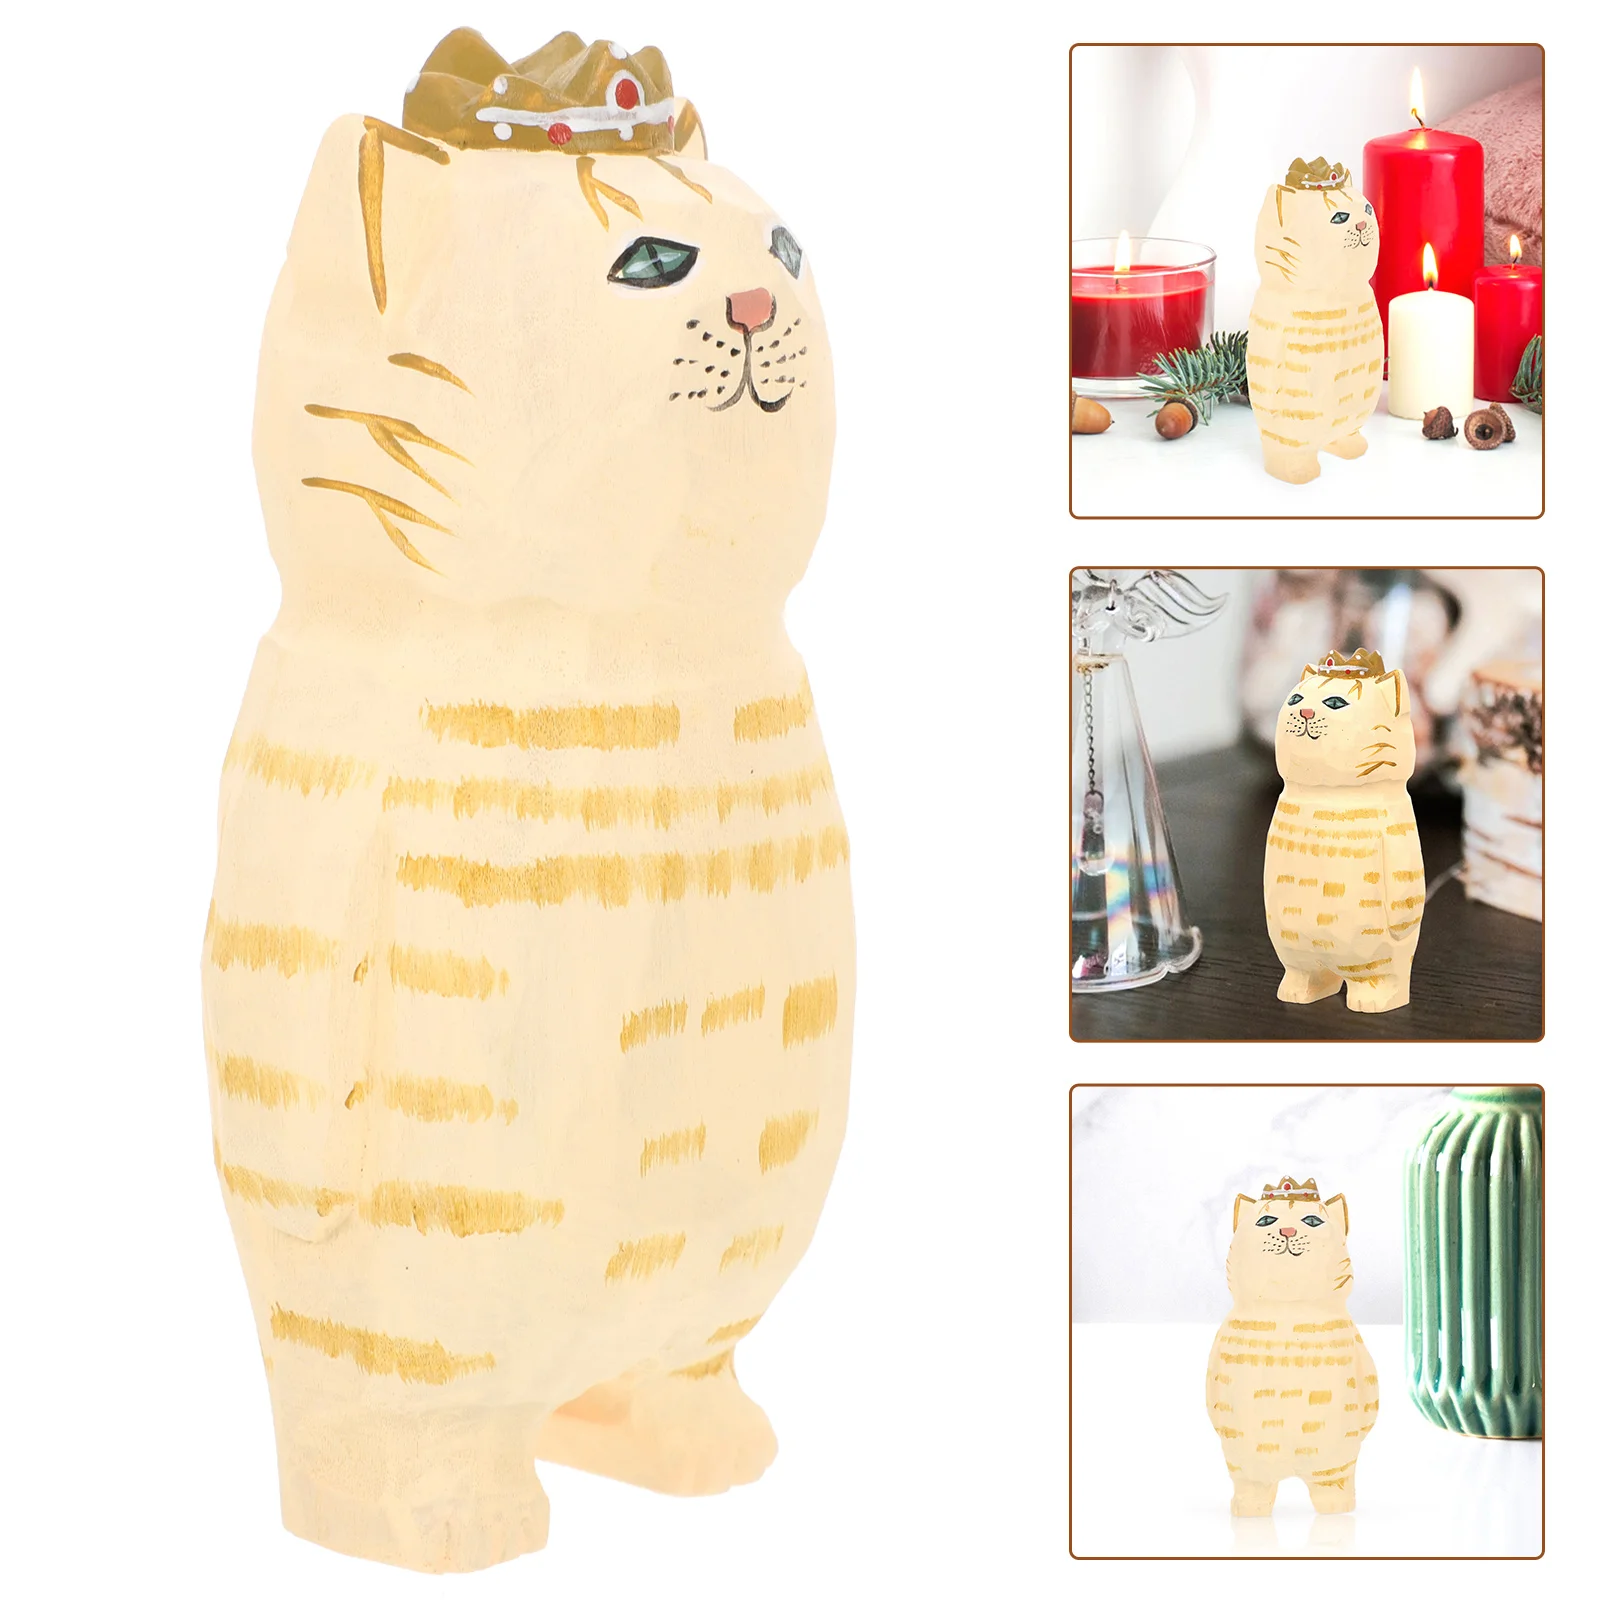 

Animal Wooden Cat Kitten Sculpture Carved Carving Figurines Ornament Statue Decoration Funny Statues Model Topper Cupcake